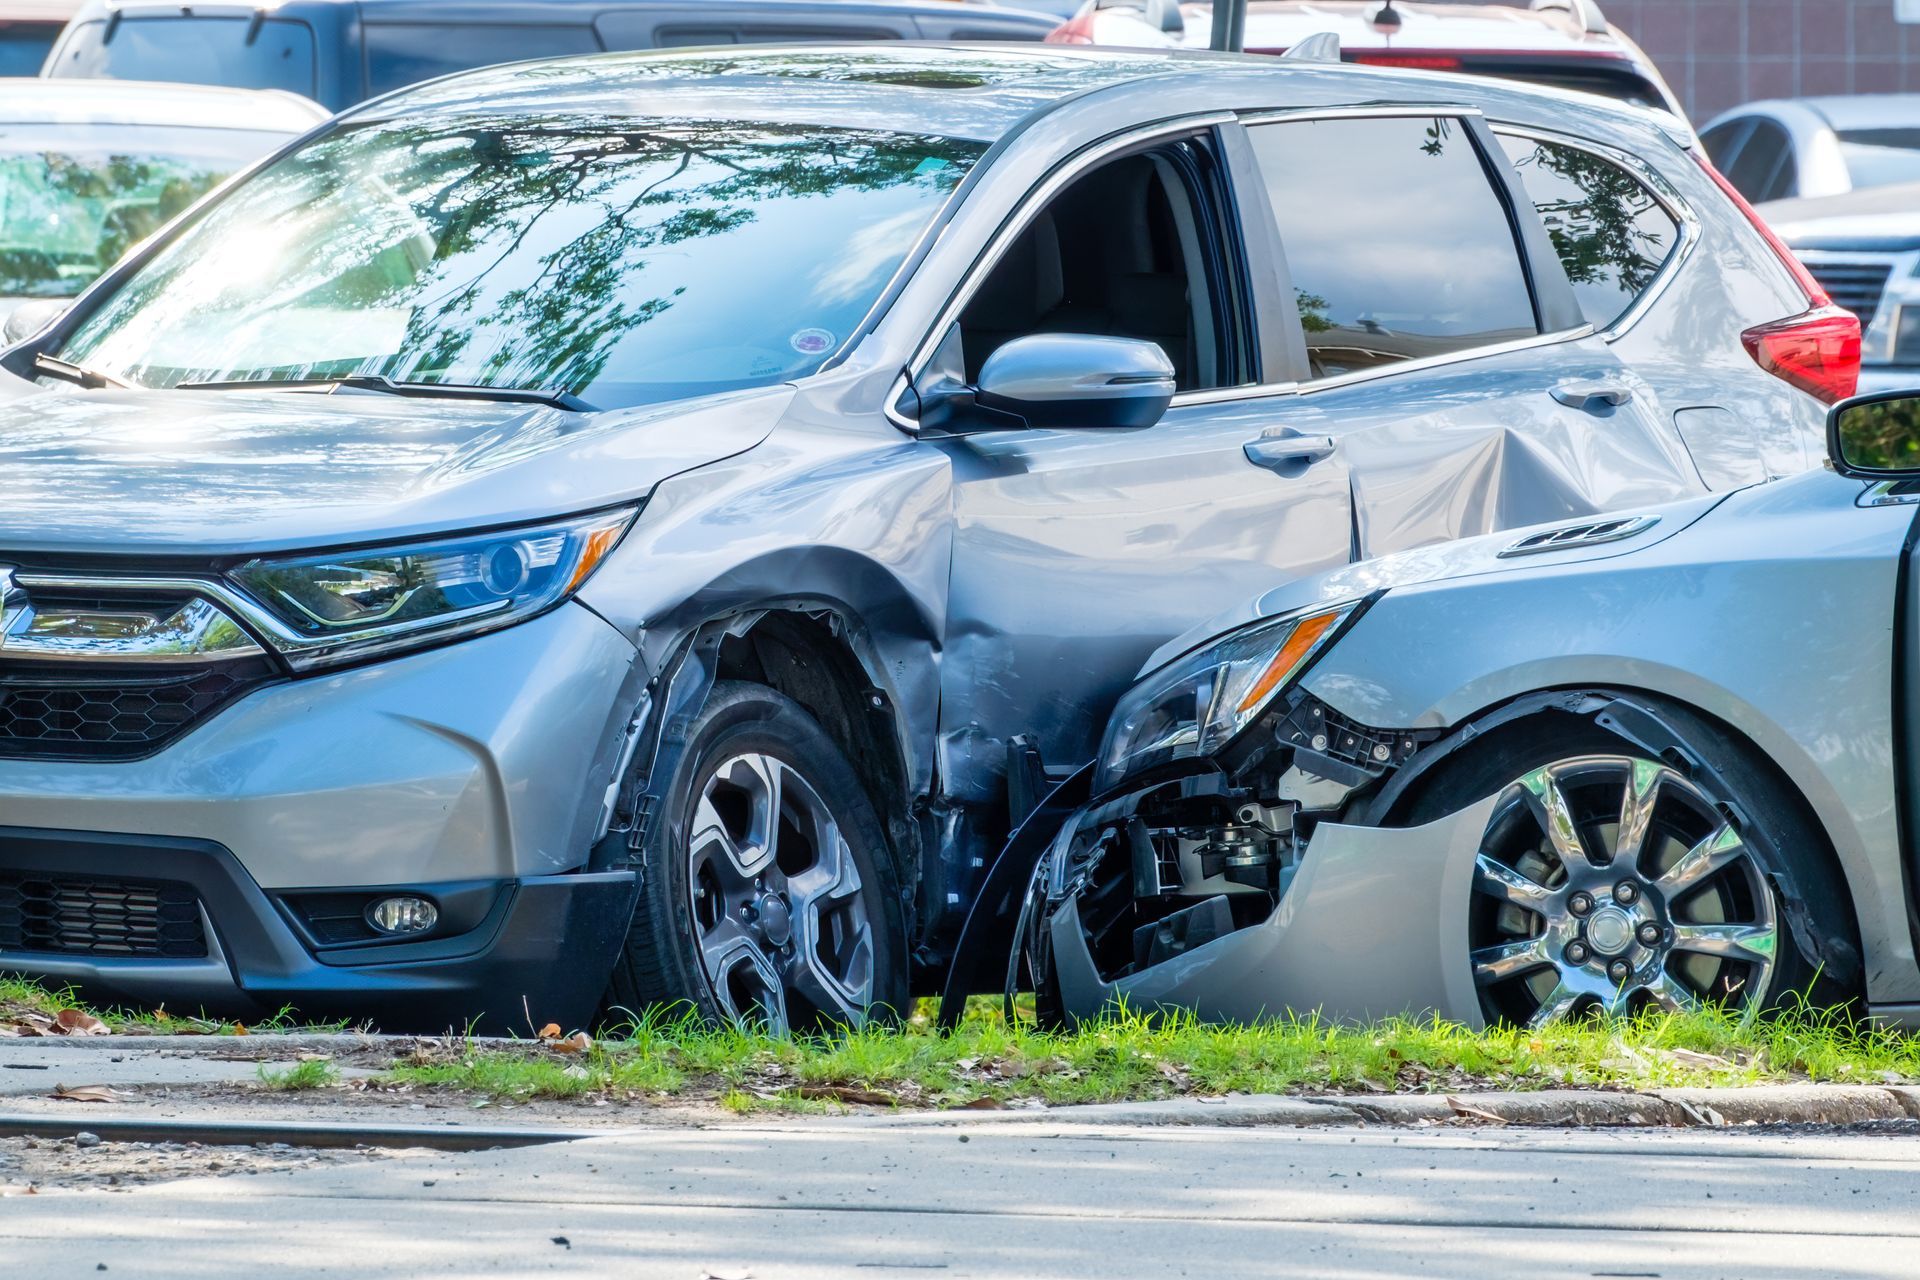 A car crash between two cars. Article by Ernesto Gonzalez on common types of accidents.